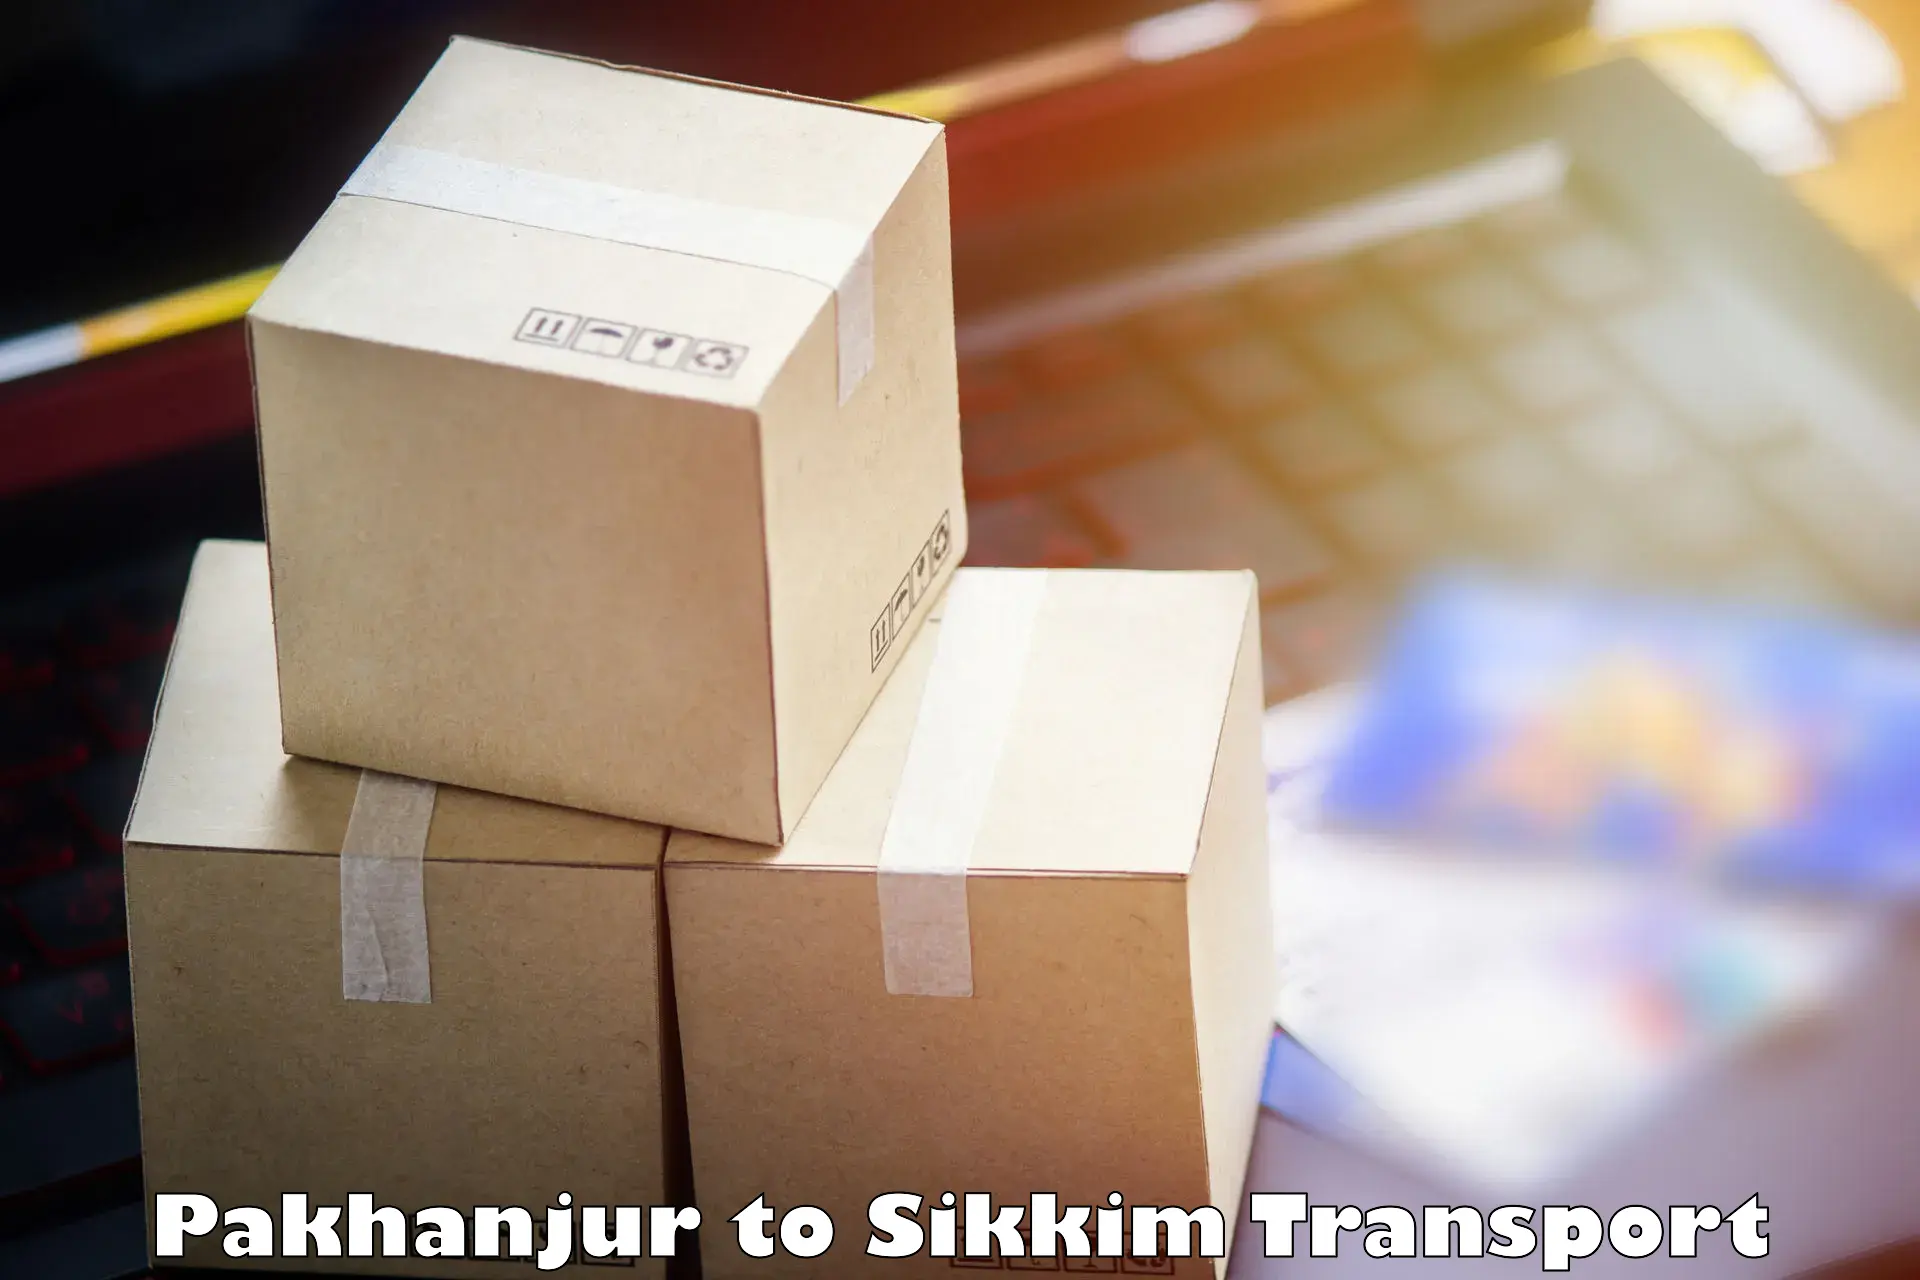 Shipping services Pakhanjur to East Sikkim